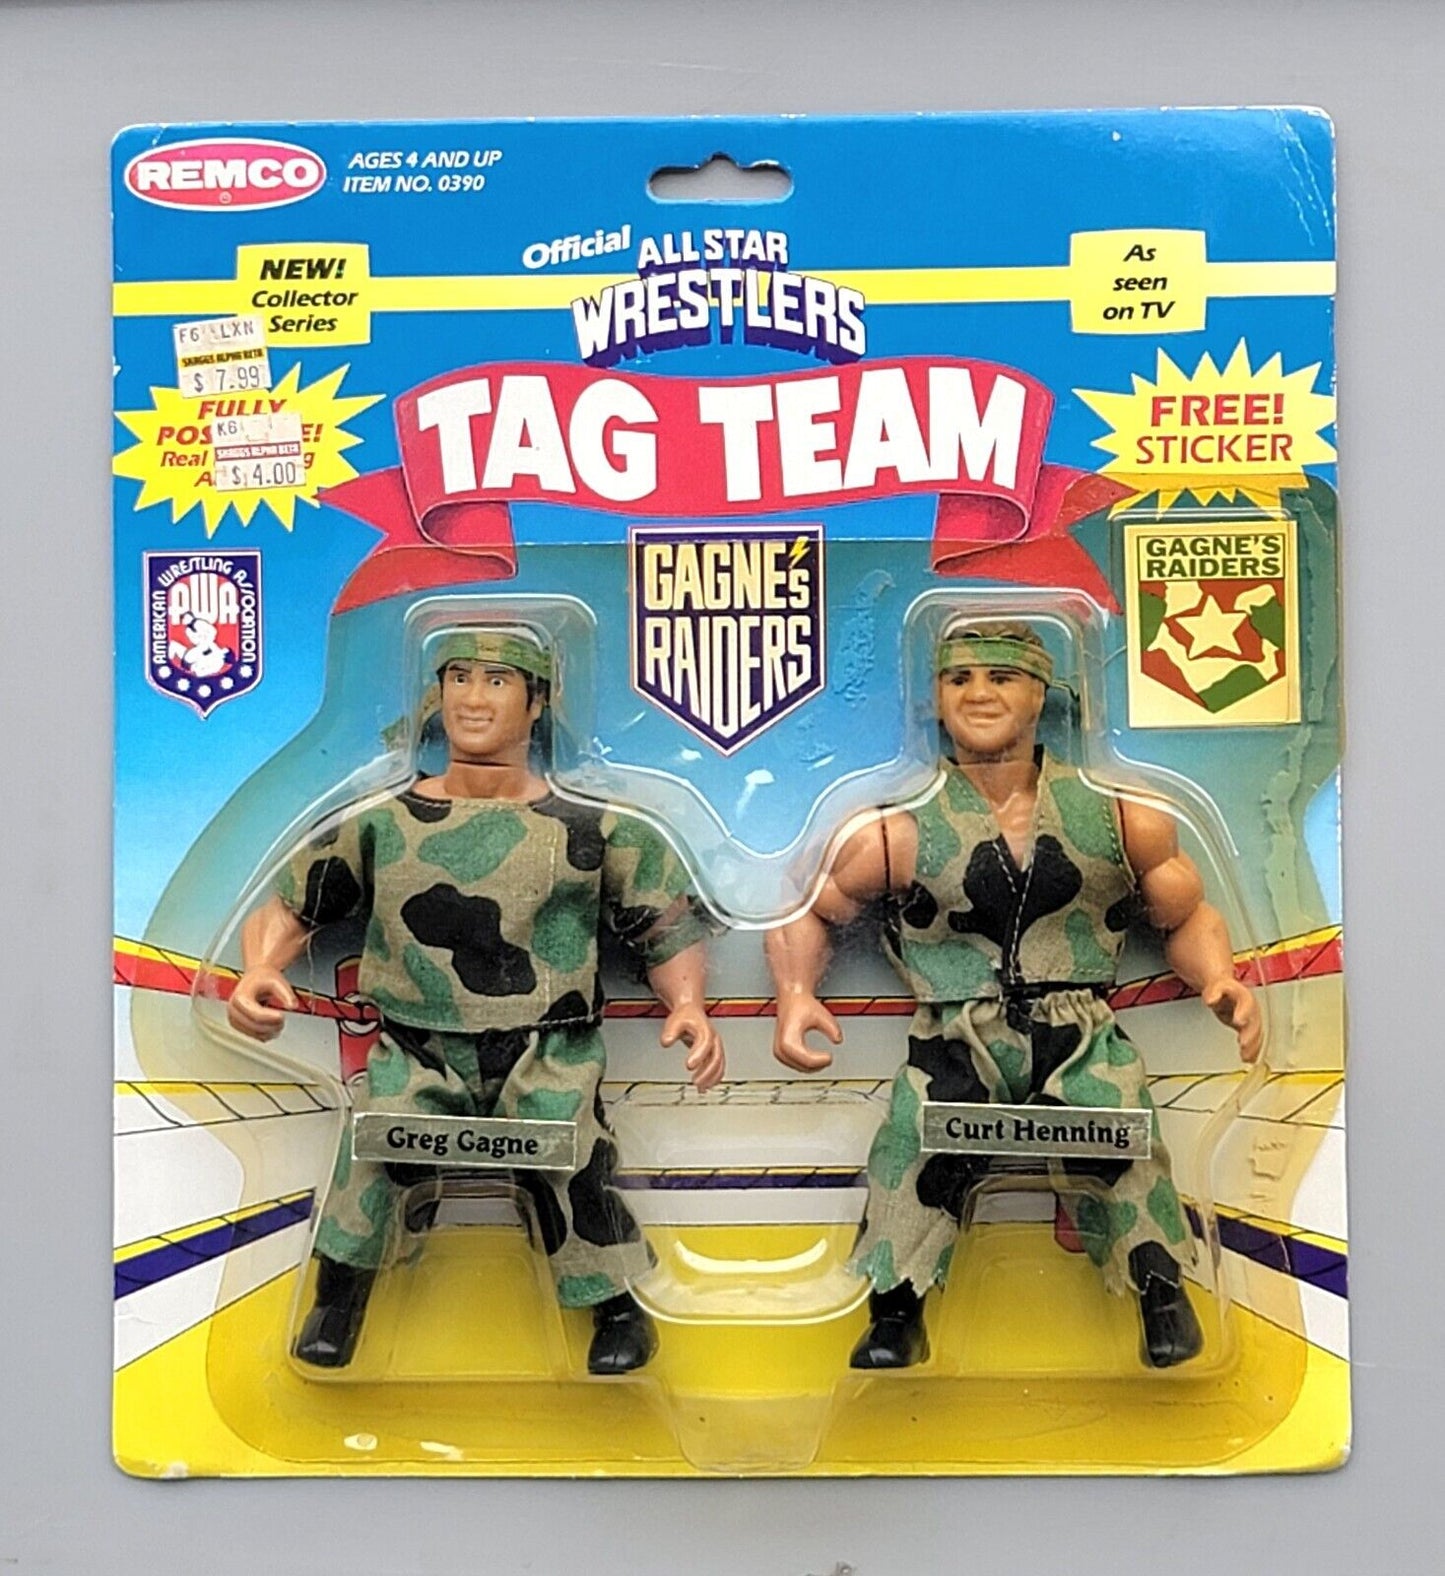 1985 AWA Remco All Star Wrestlers Series 2 Gagne's Raiders: Greg Gagne & Curt Hennig [With Large Camo Pattern]